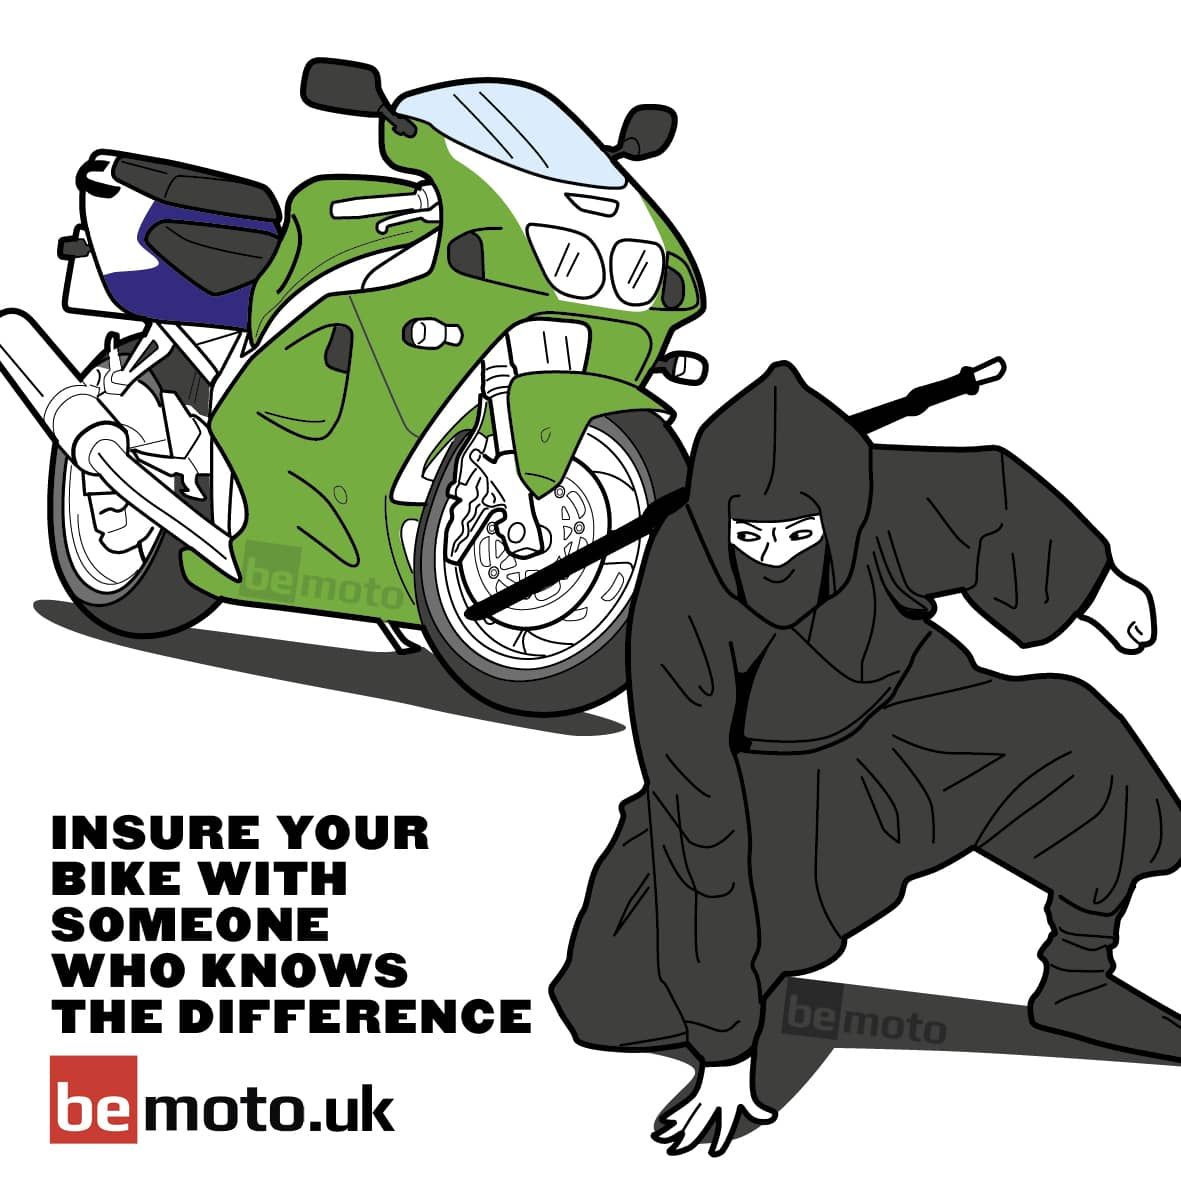 Ninja Meme Advert: Insure your bike with someone who knows the difference